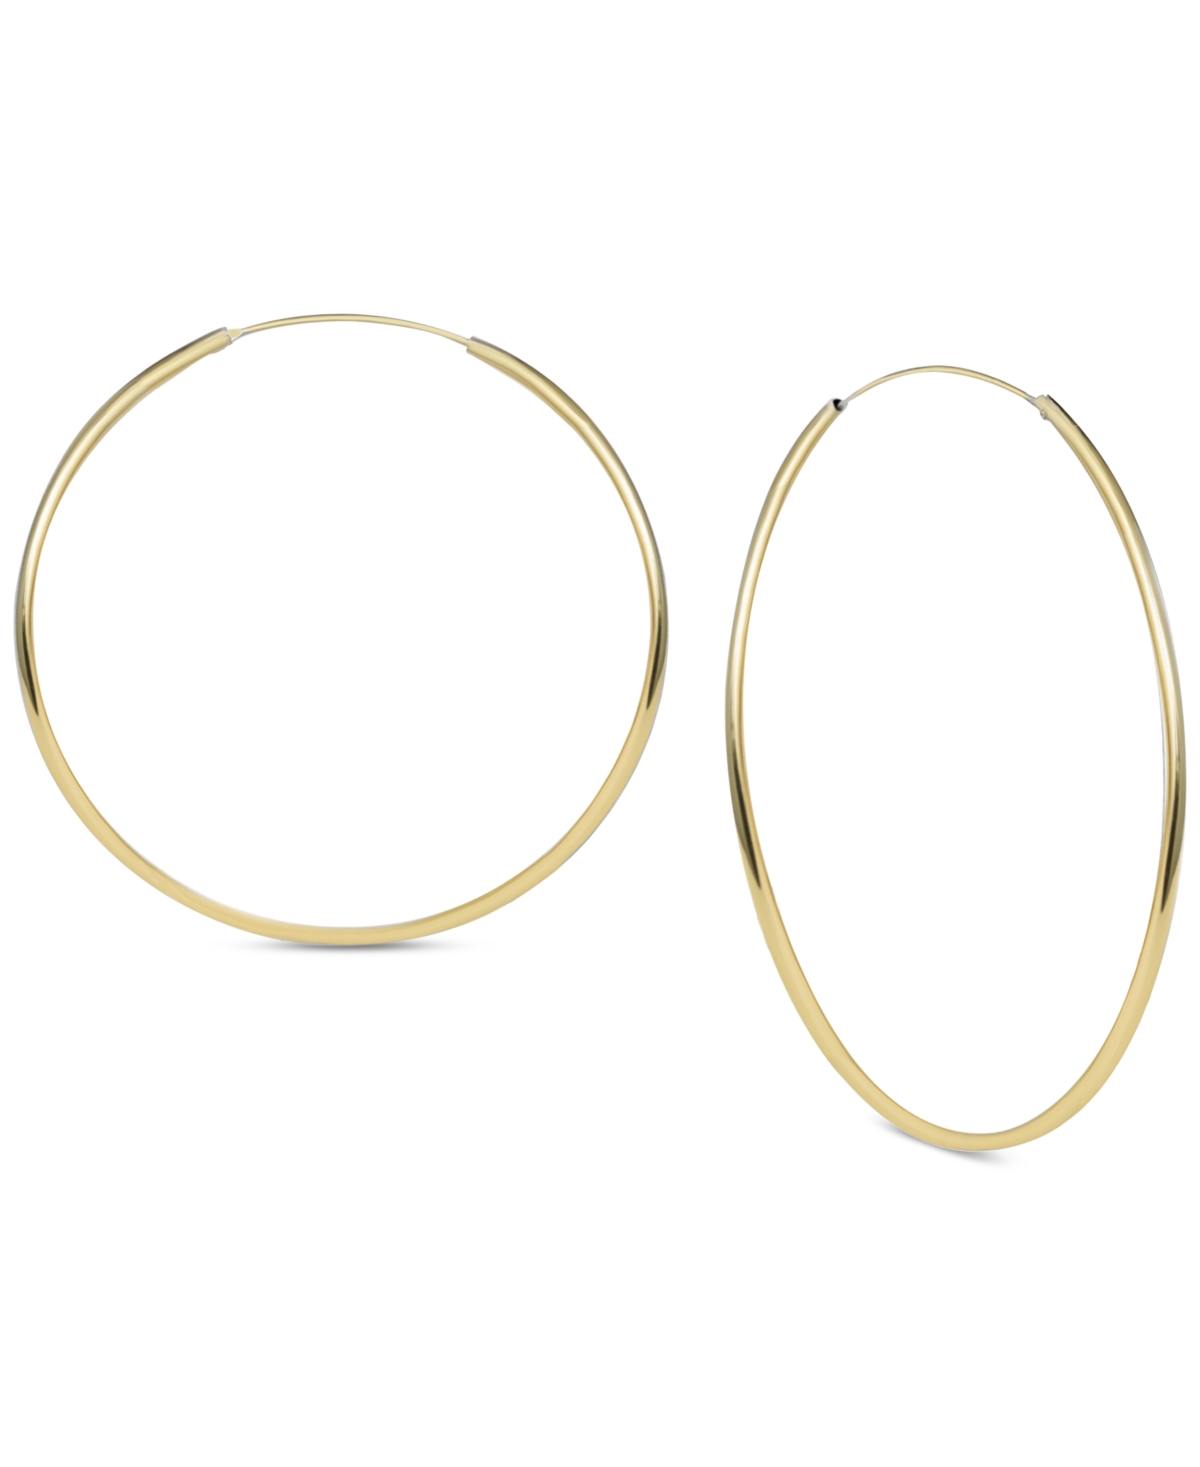 Argento Vivo Large Endless Large Hoop Earrings in Gold-Plated Sterling Silver